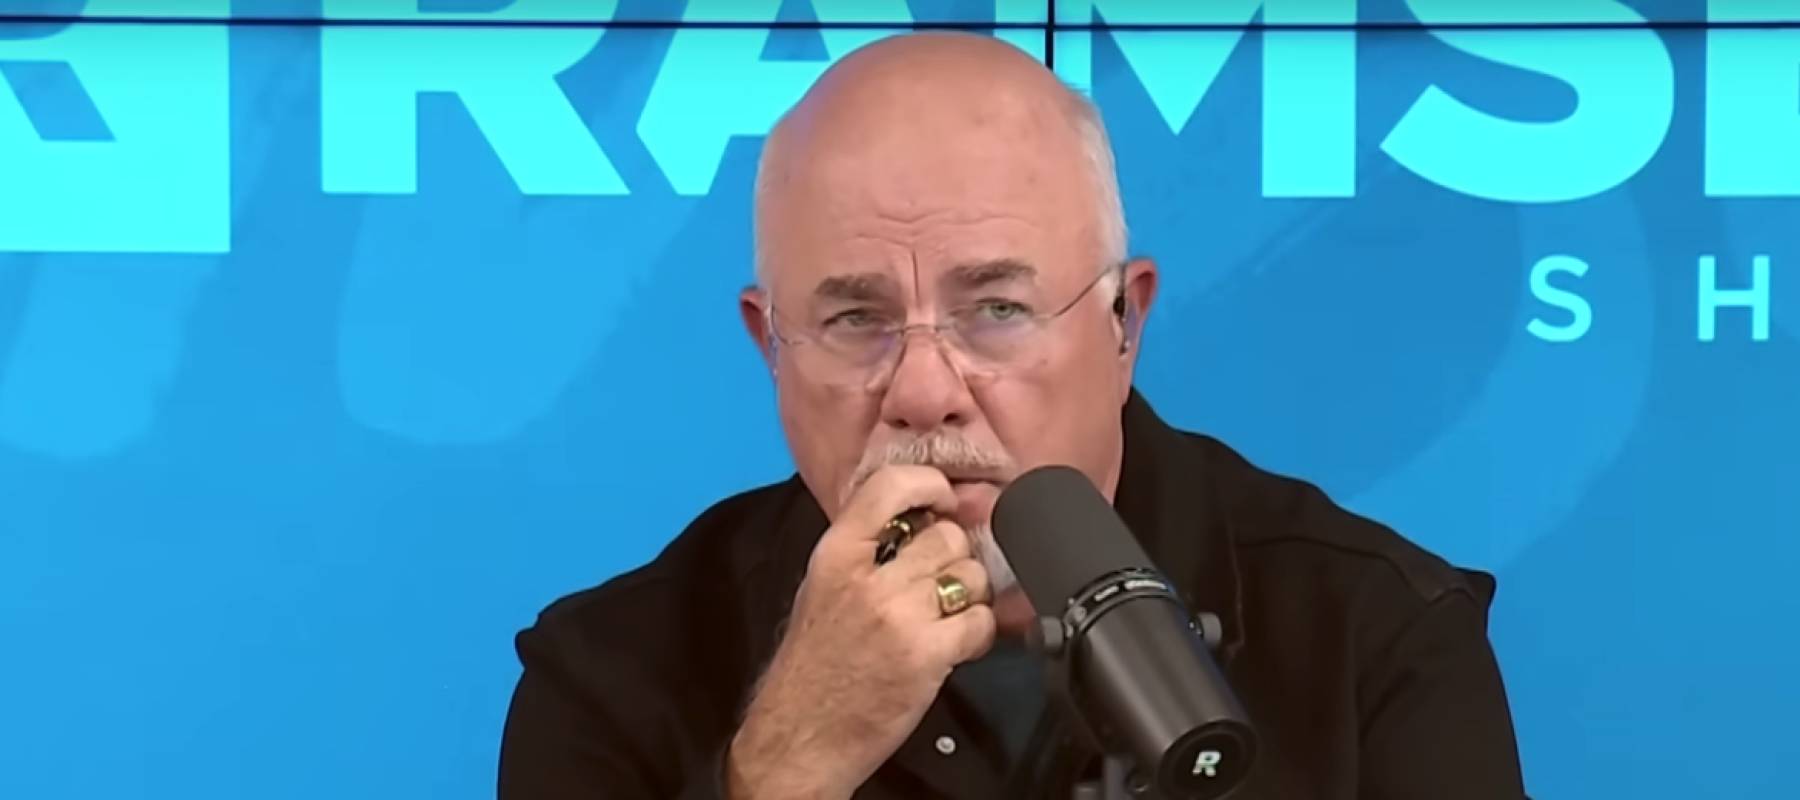 Dave Ramsey on set of his radio show, looking serious and with his hand over his mouth.